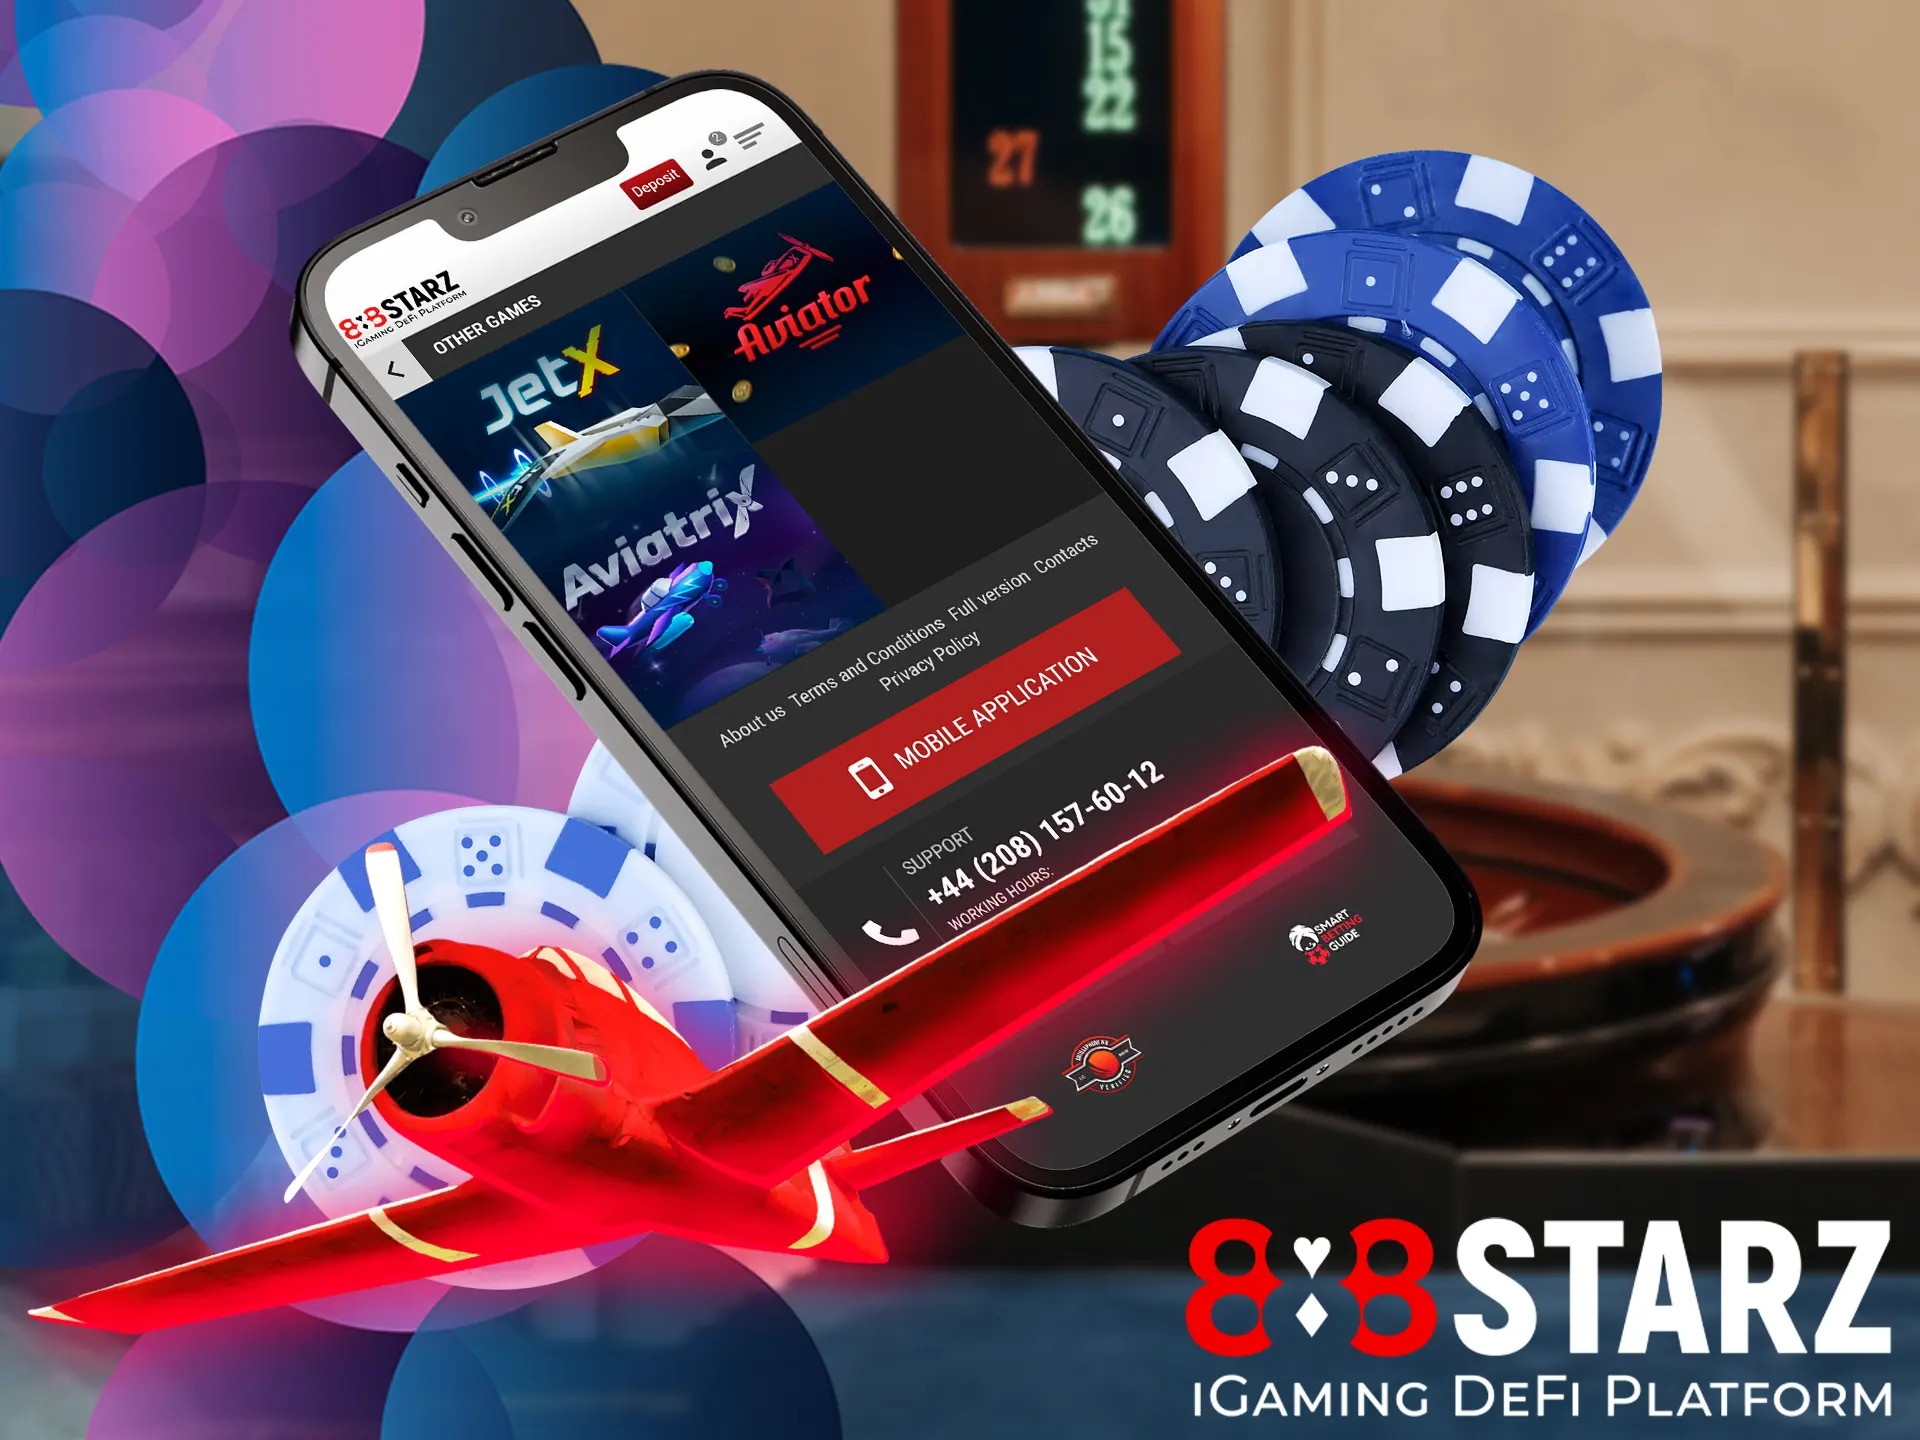 If you like fast gambling entertainment - then this section of 888starz is created especially for you.